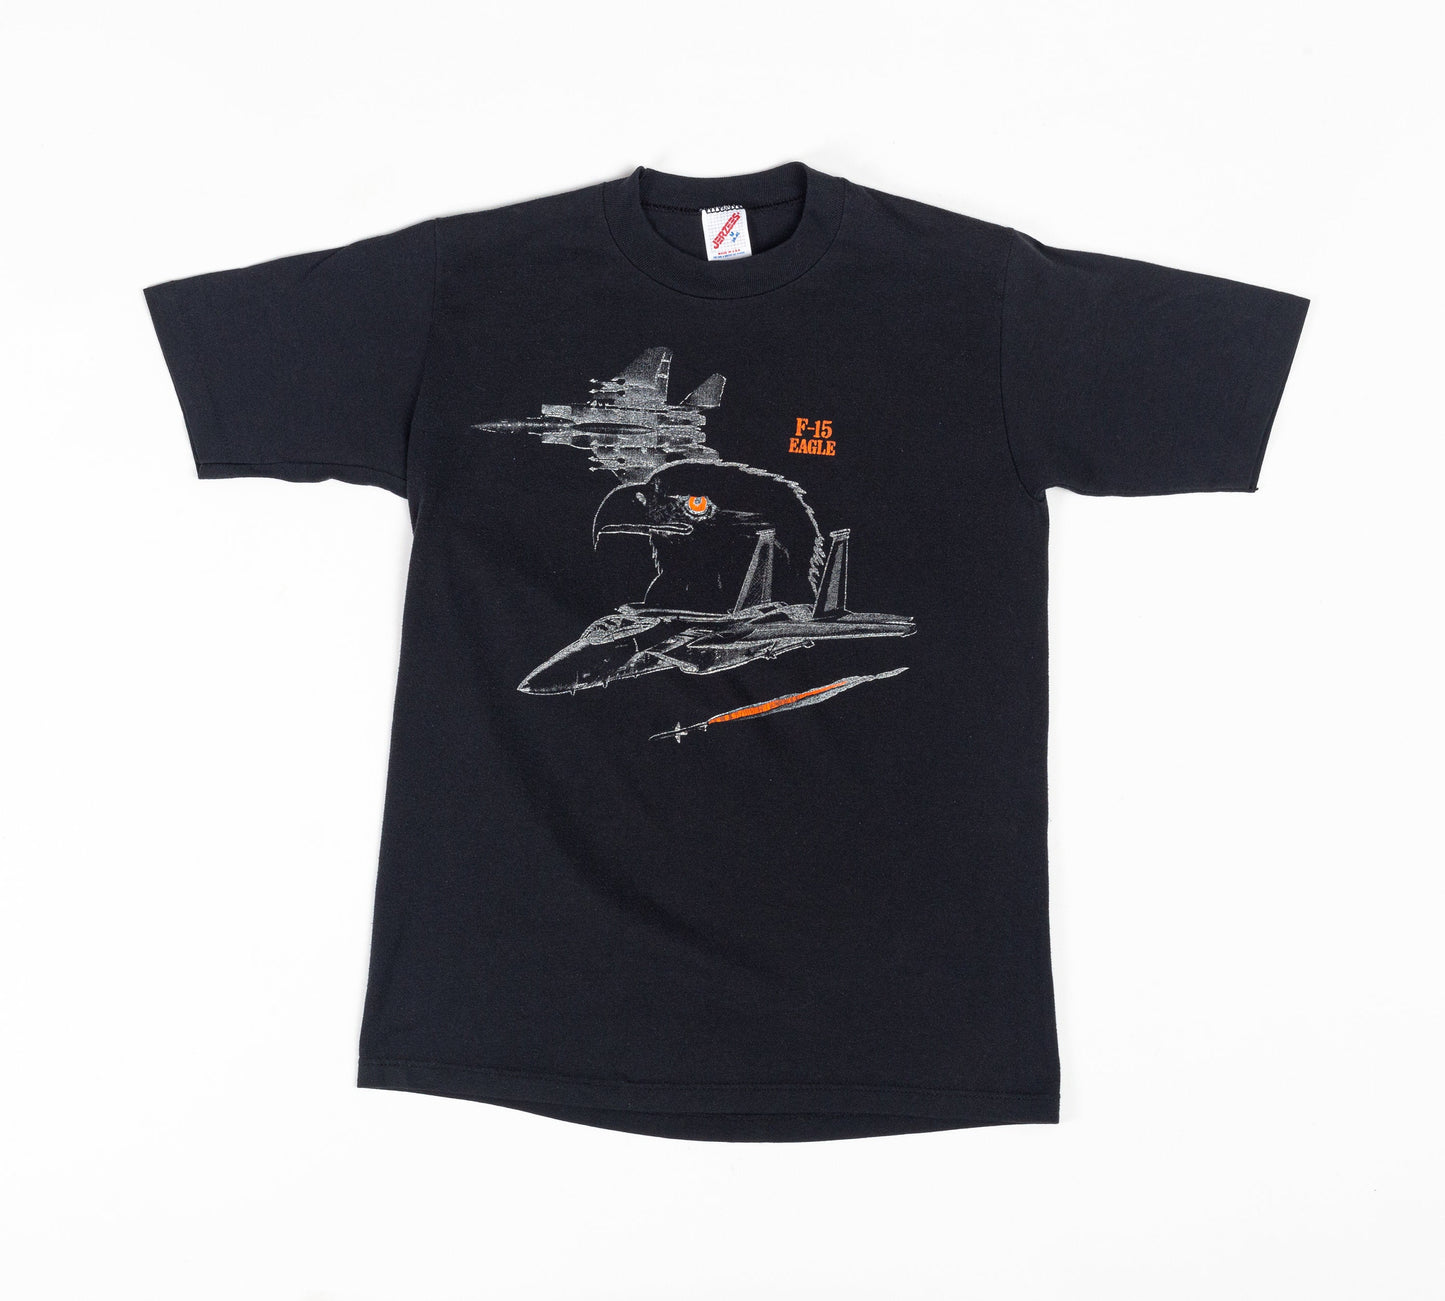 80s F-15 Eagle Fighter Jet Shirt - Small to Medium 